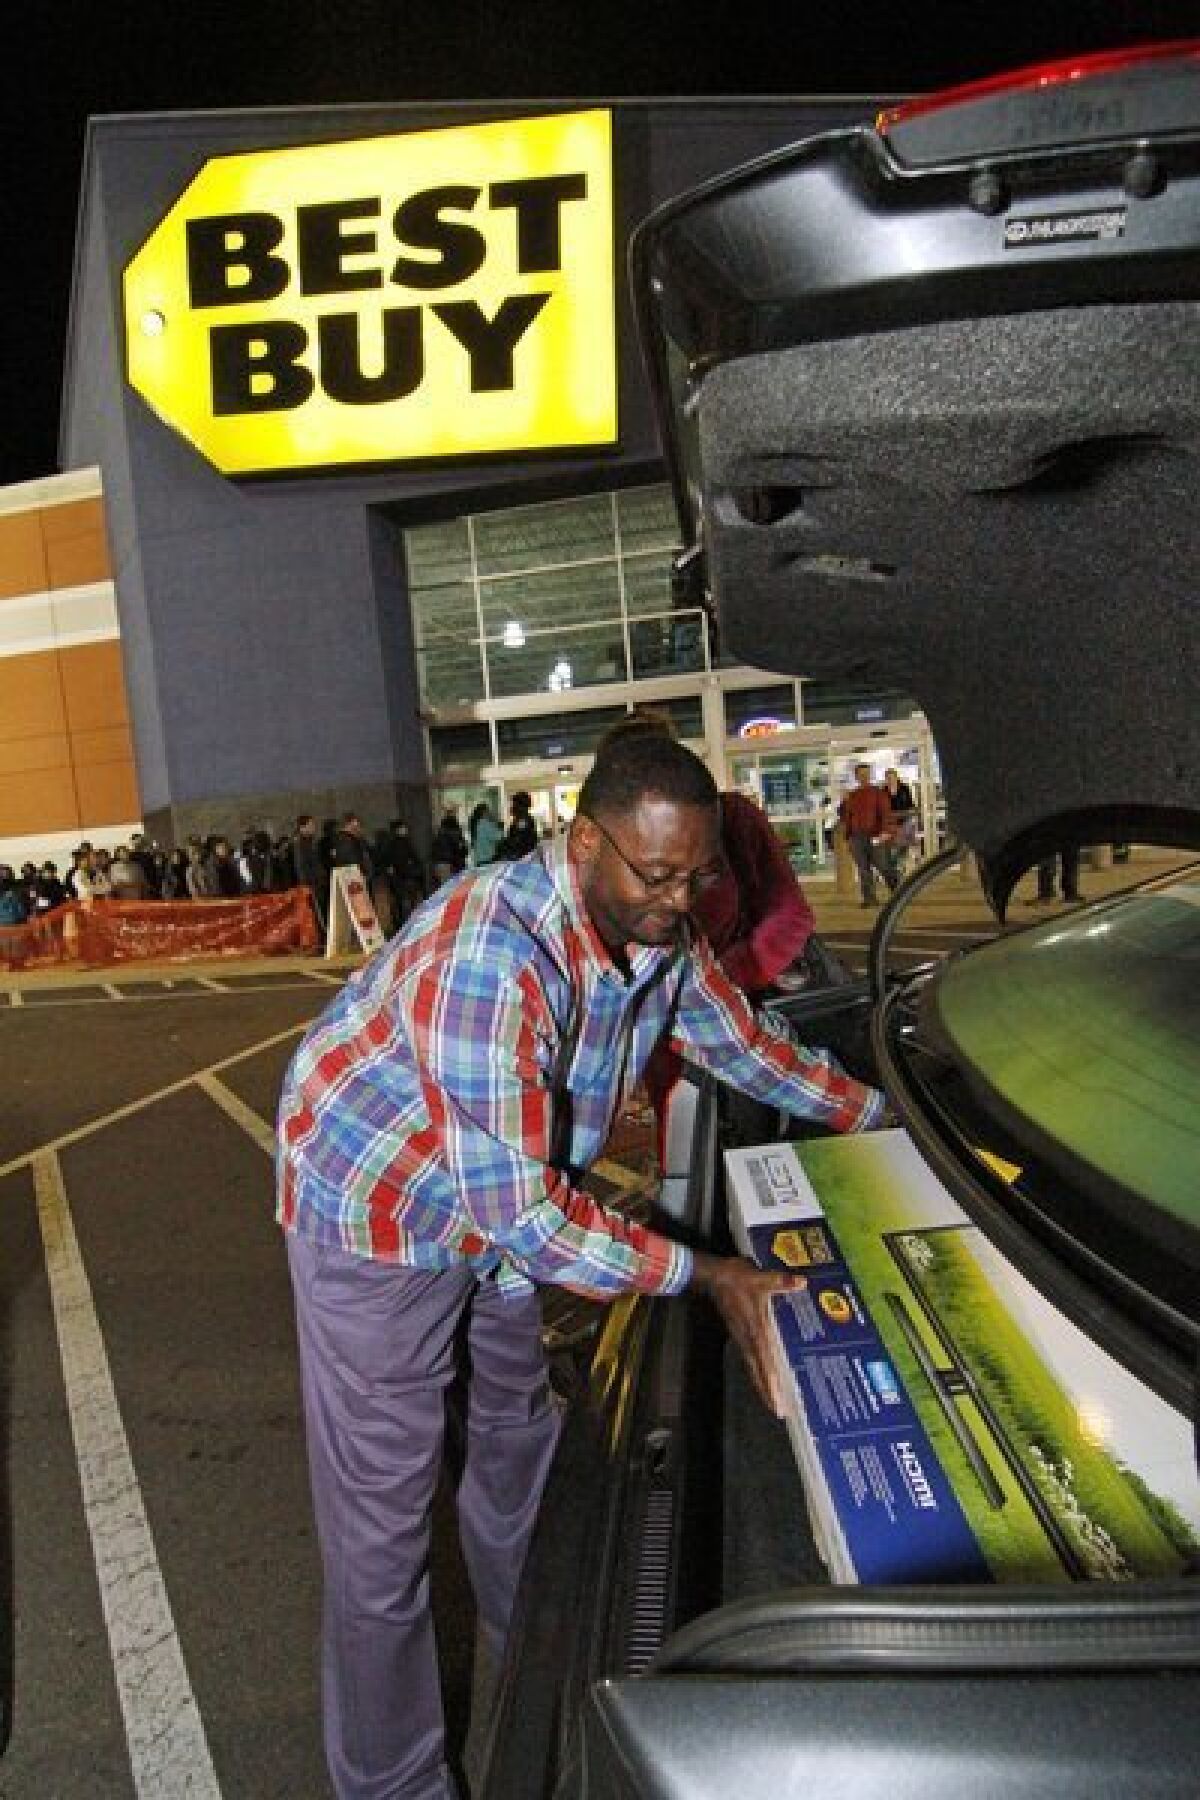 Arthur Vardaman of Madison, Miss., places a new television into the trunk of his car outside a Best Buy store in Jackson, Miss.